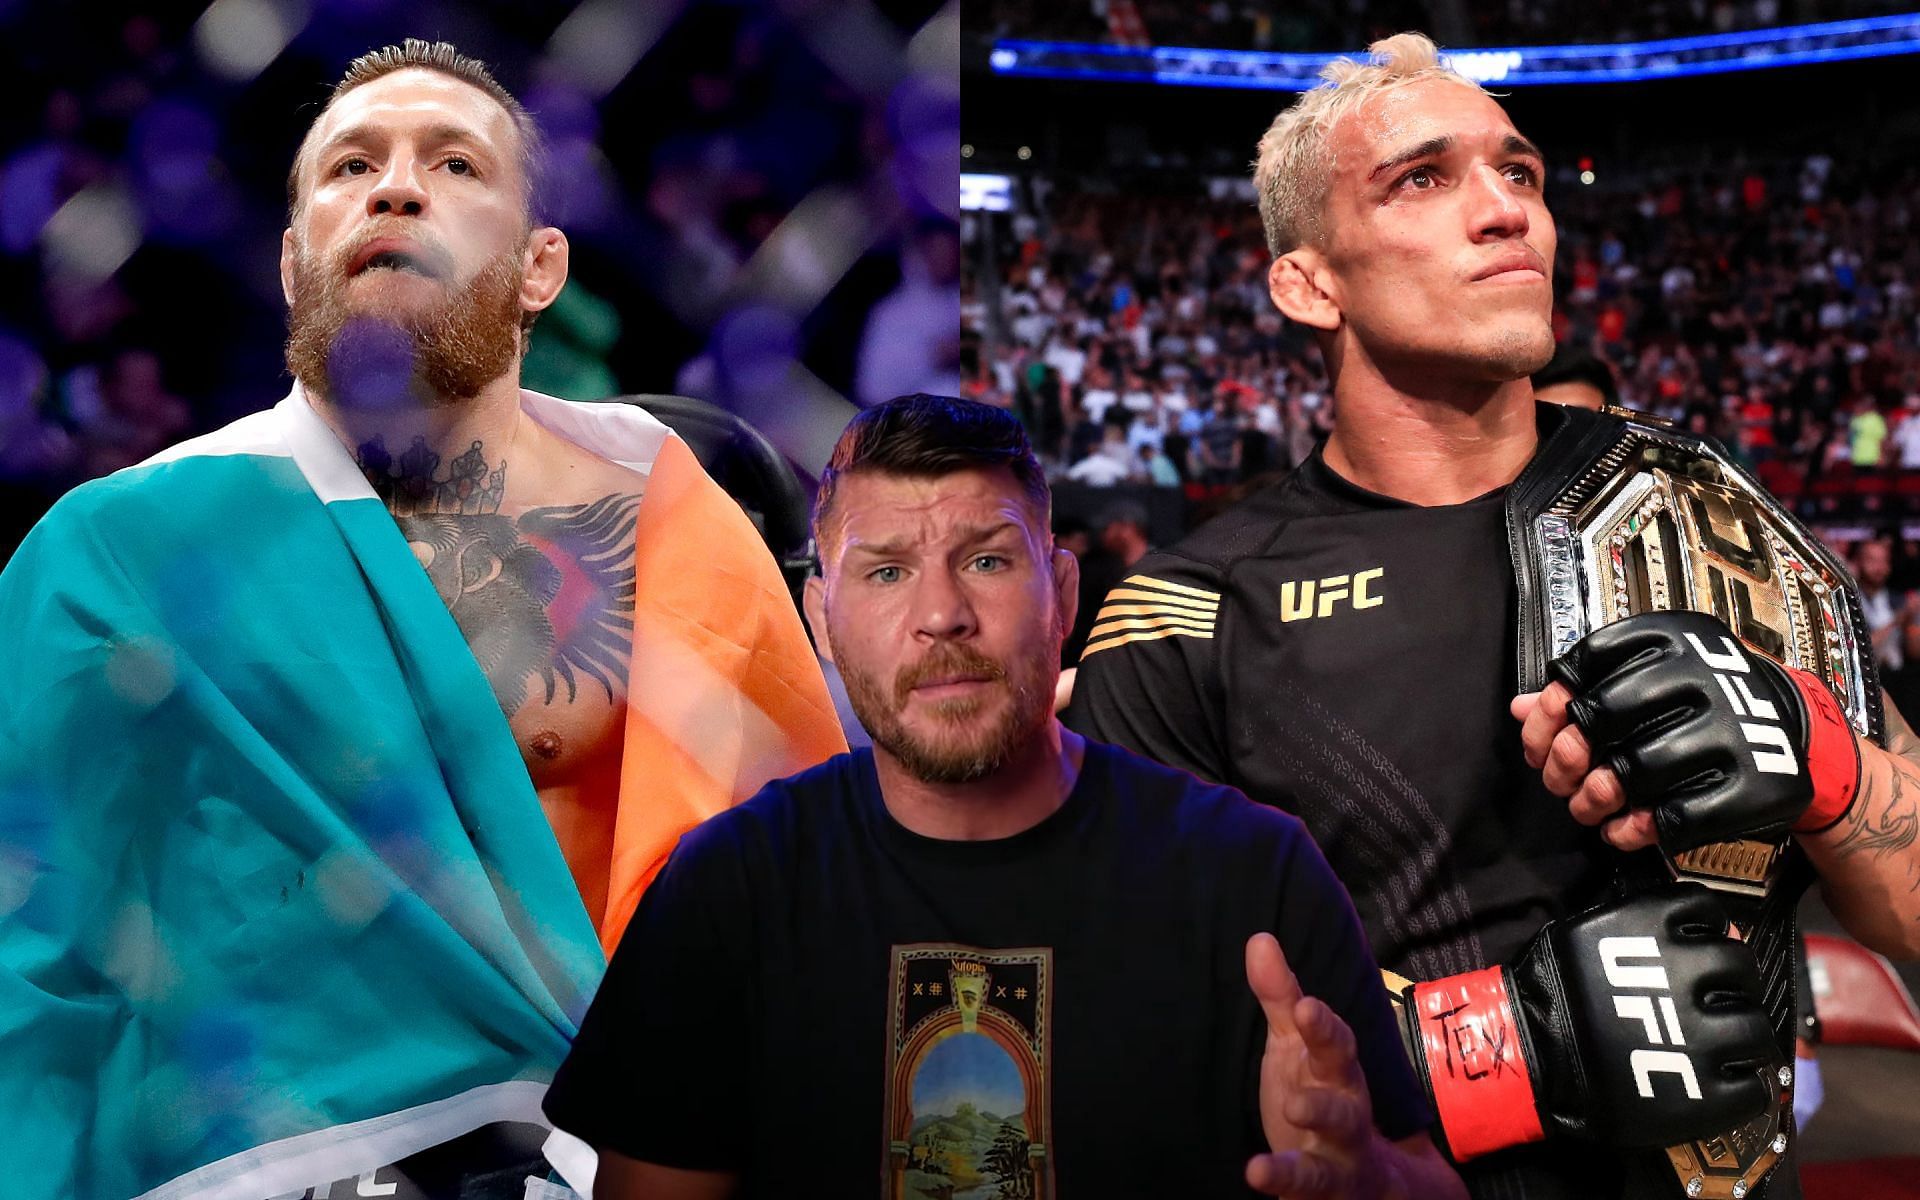 Conor McGregor (left), Michael Bisping (center), and Charles Oliveira (right) (Images via Getty and YouTube / Michael Bisping)